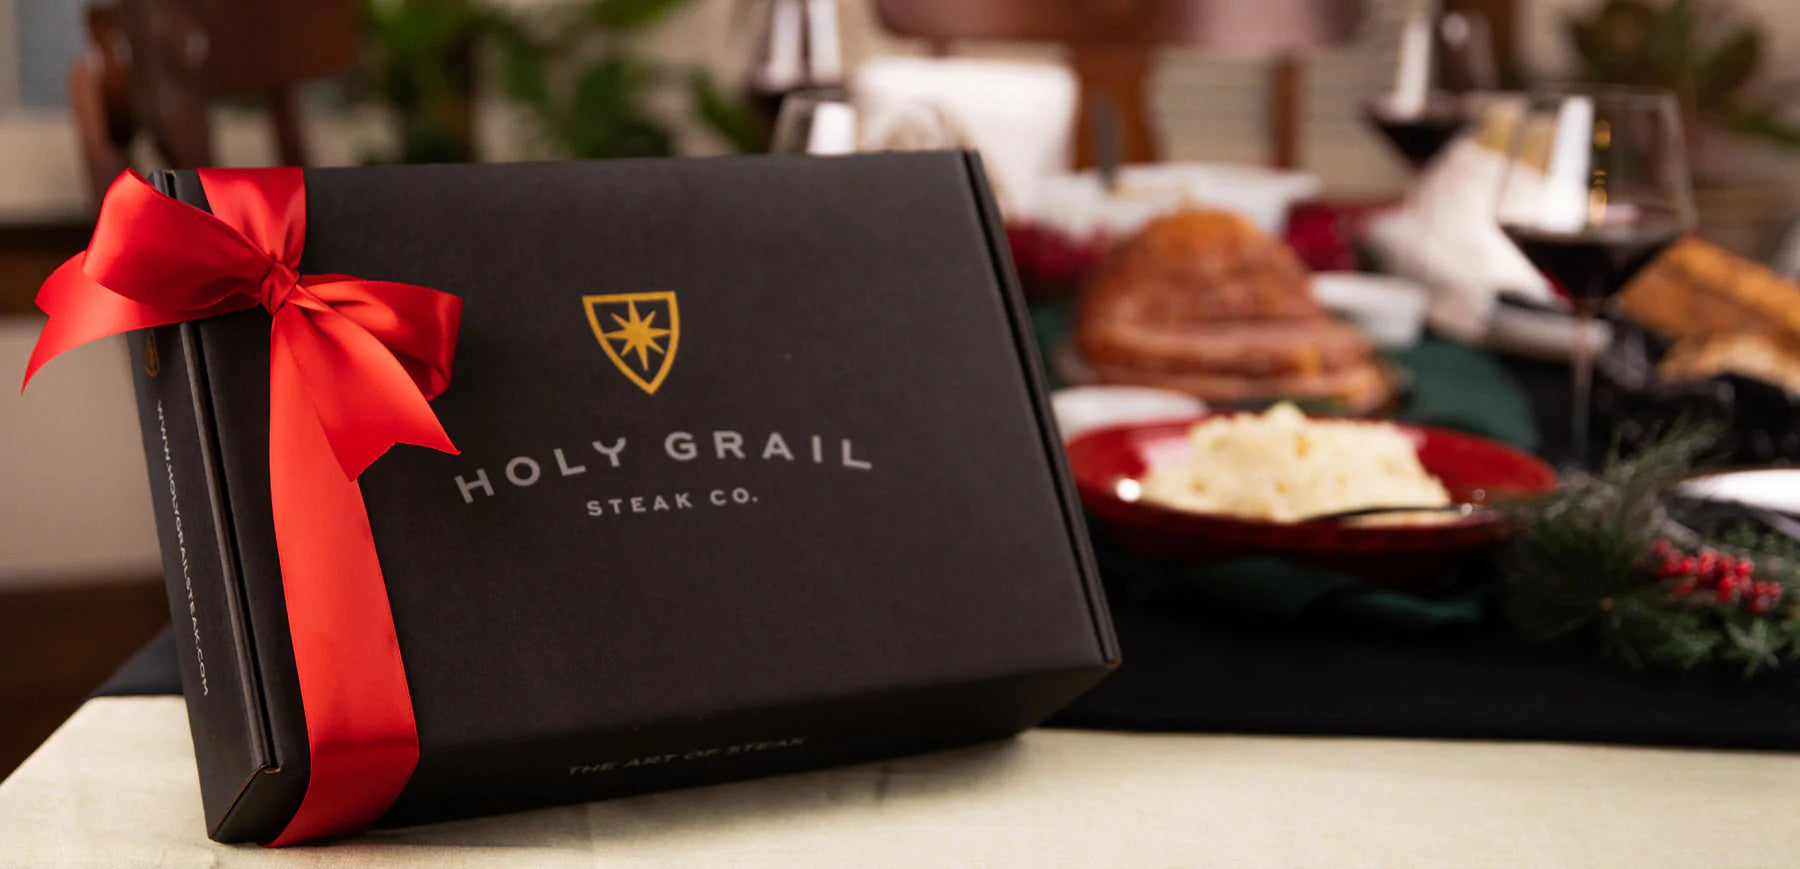 The Gift Collection - Holy Grail Steak Co.